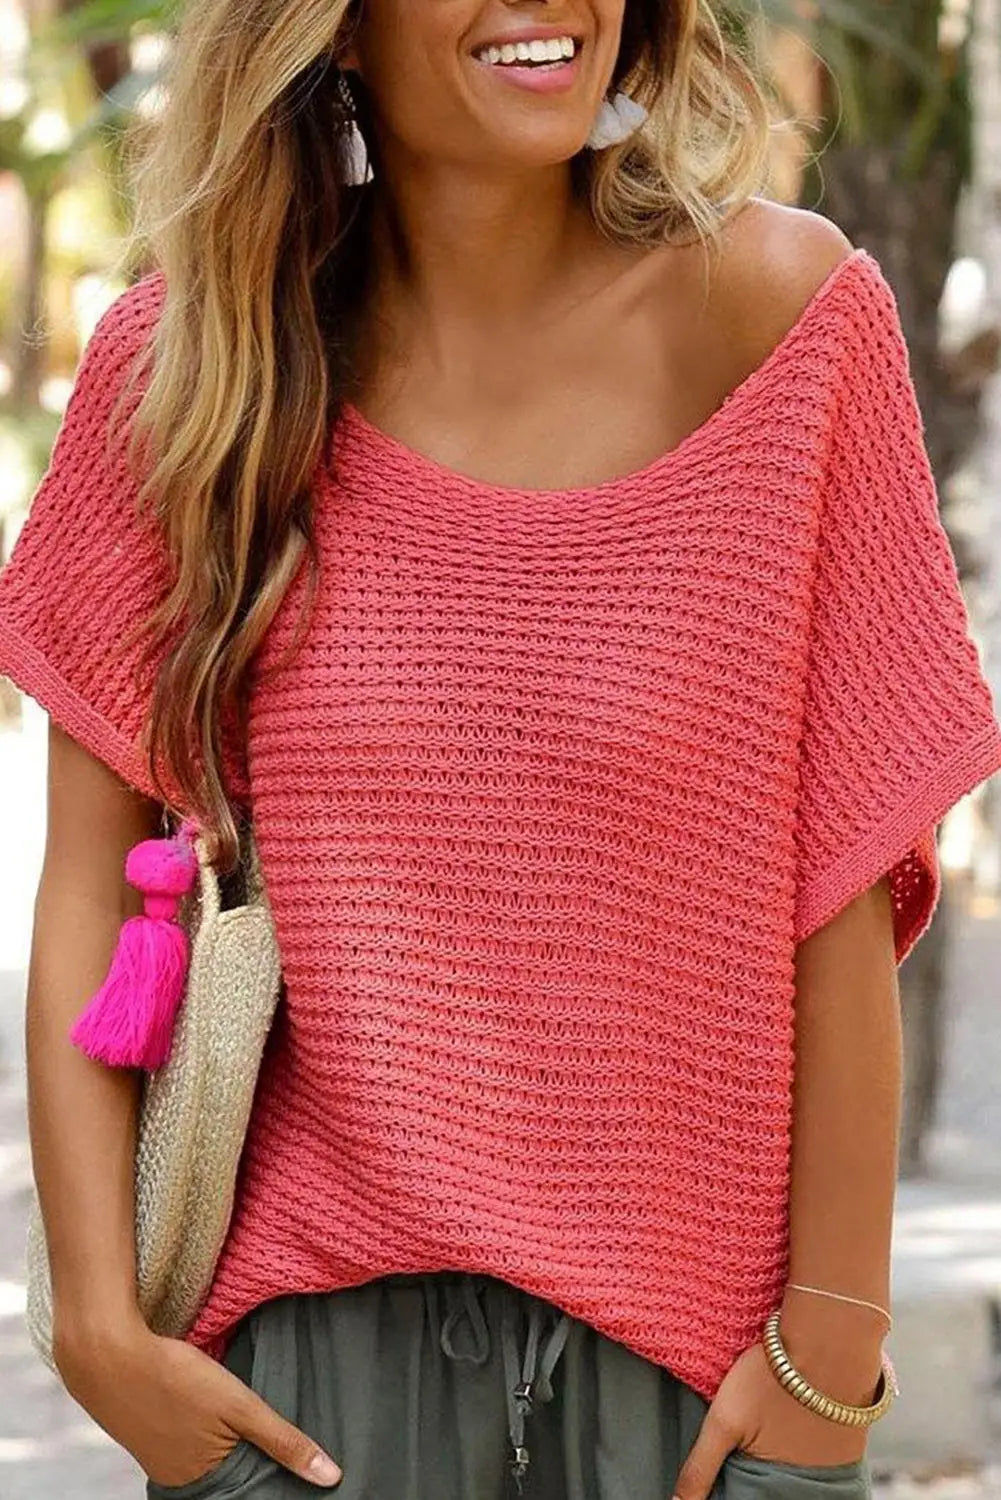 Red clay solid loose knit short dolman sleeve sweater - l / 100% acrylic - sweaters & cardigans